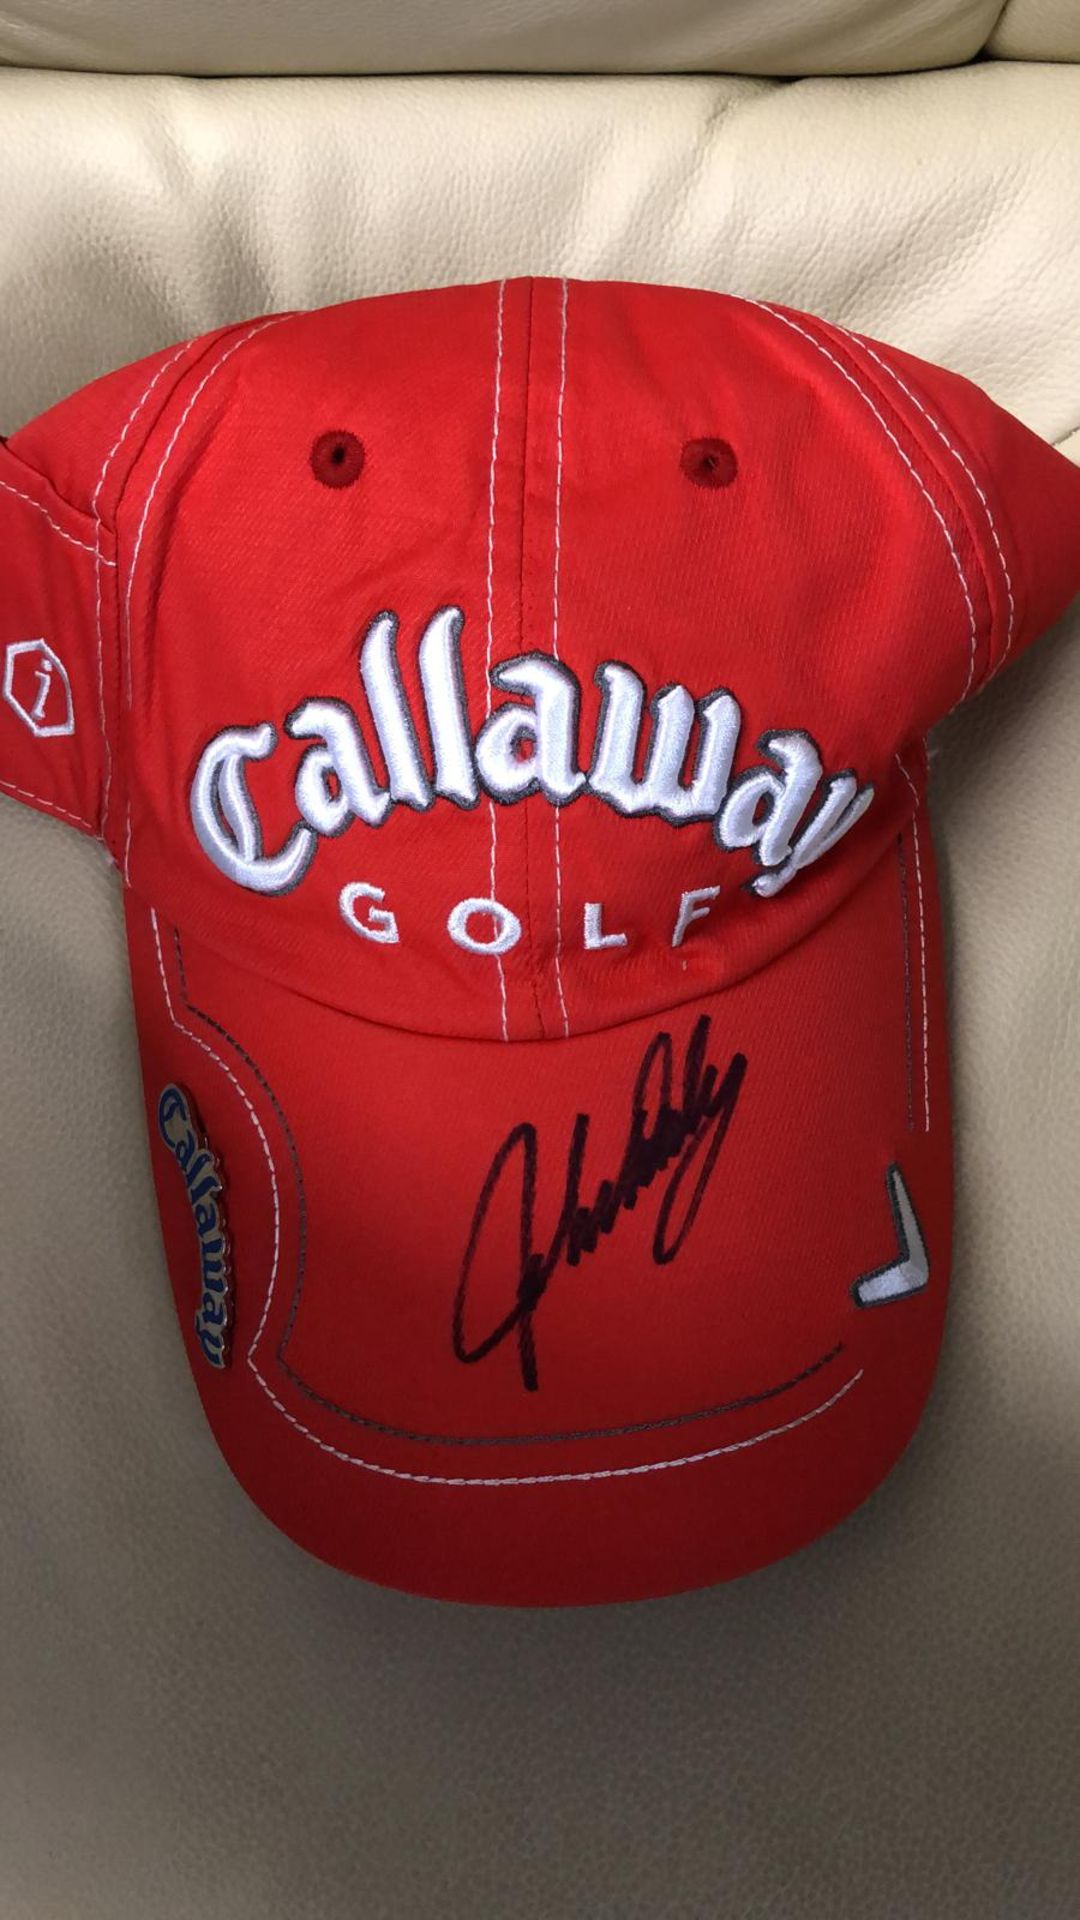 John Daly Signed Callaway Golf Hat With Certificate Of Authenticity